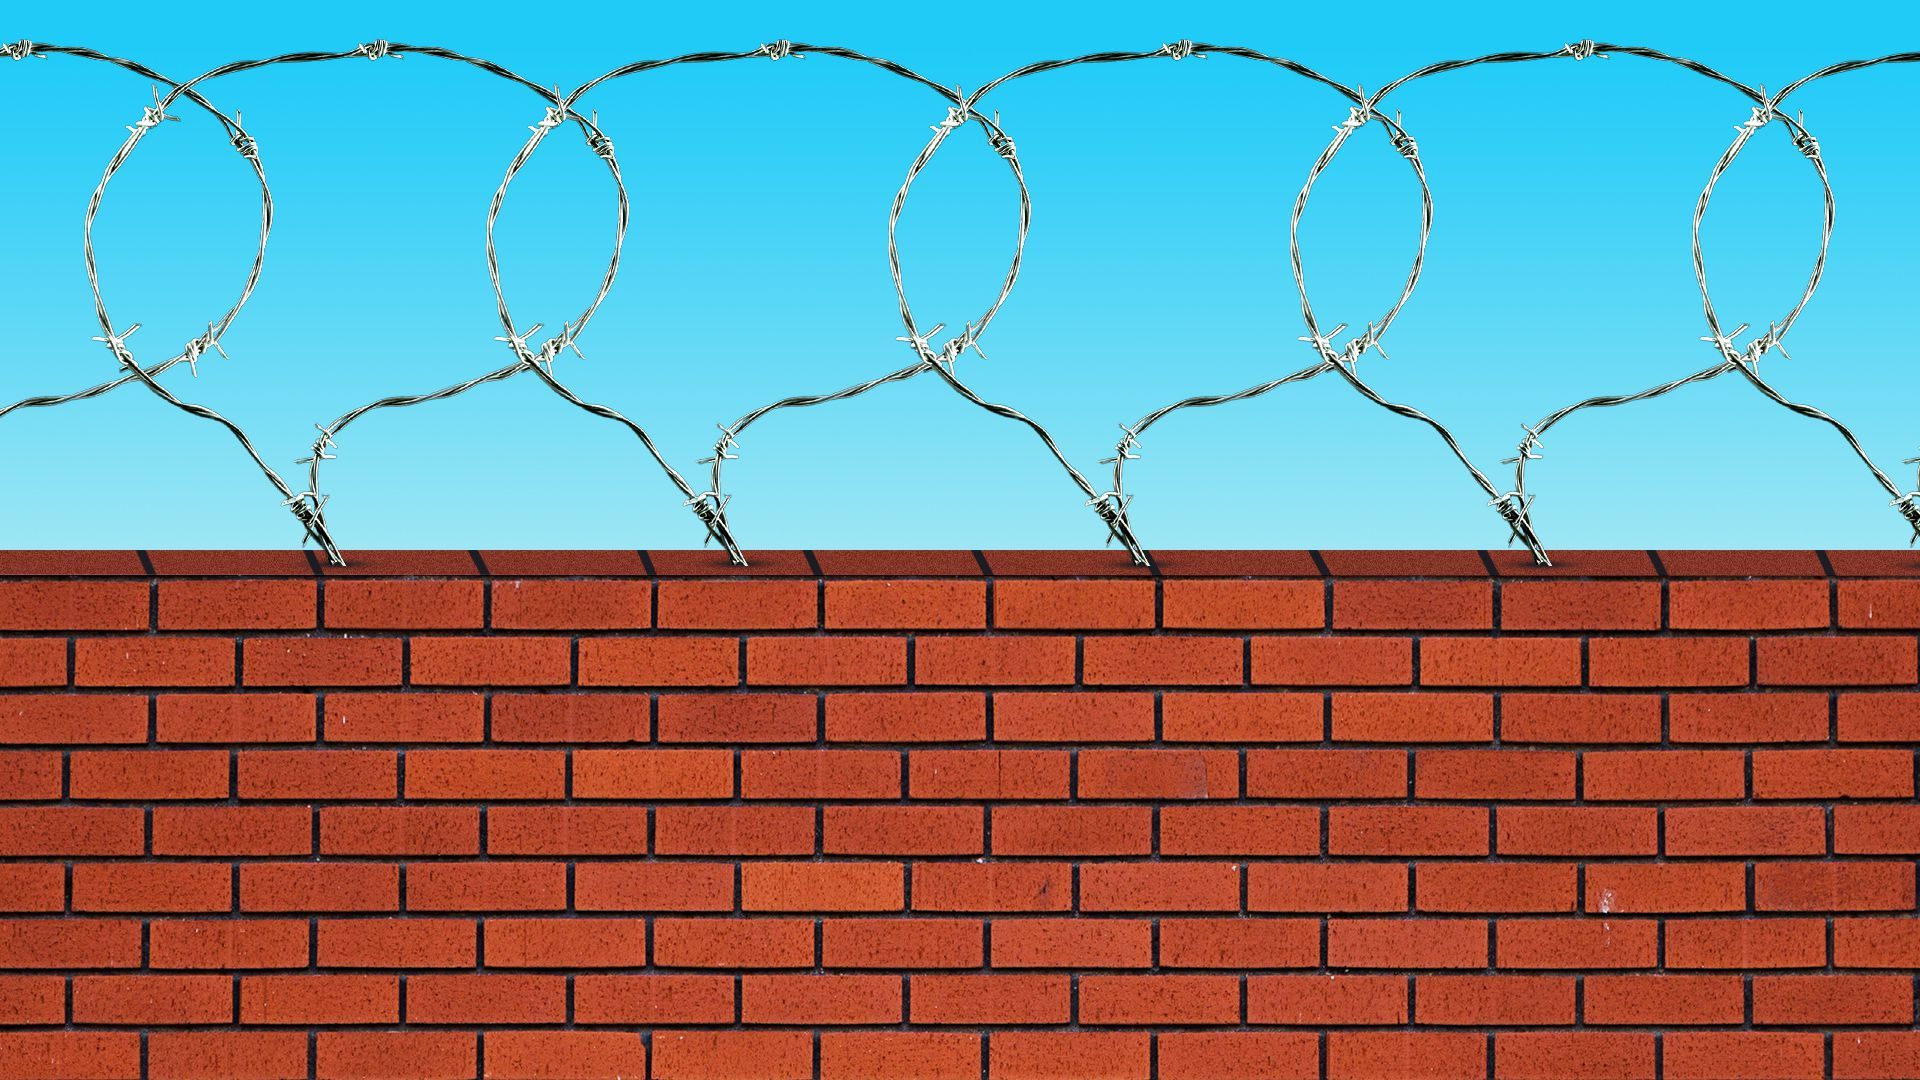 Illustration of barbed wire shaped like speech bubbles lining the top of a brick wall.   